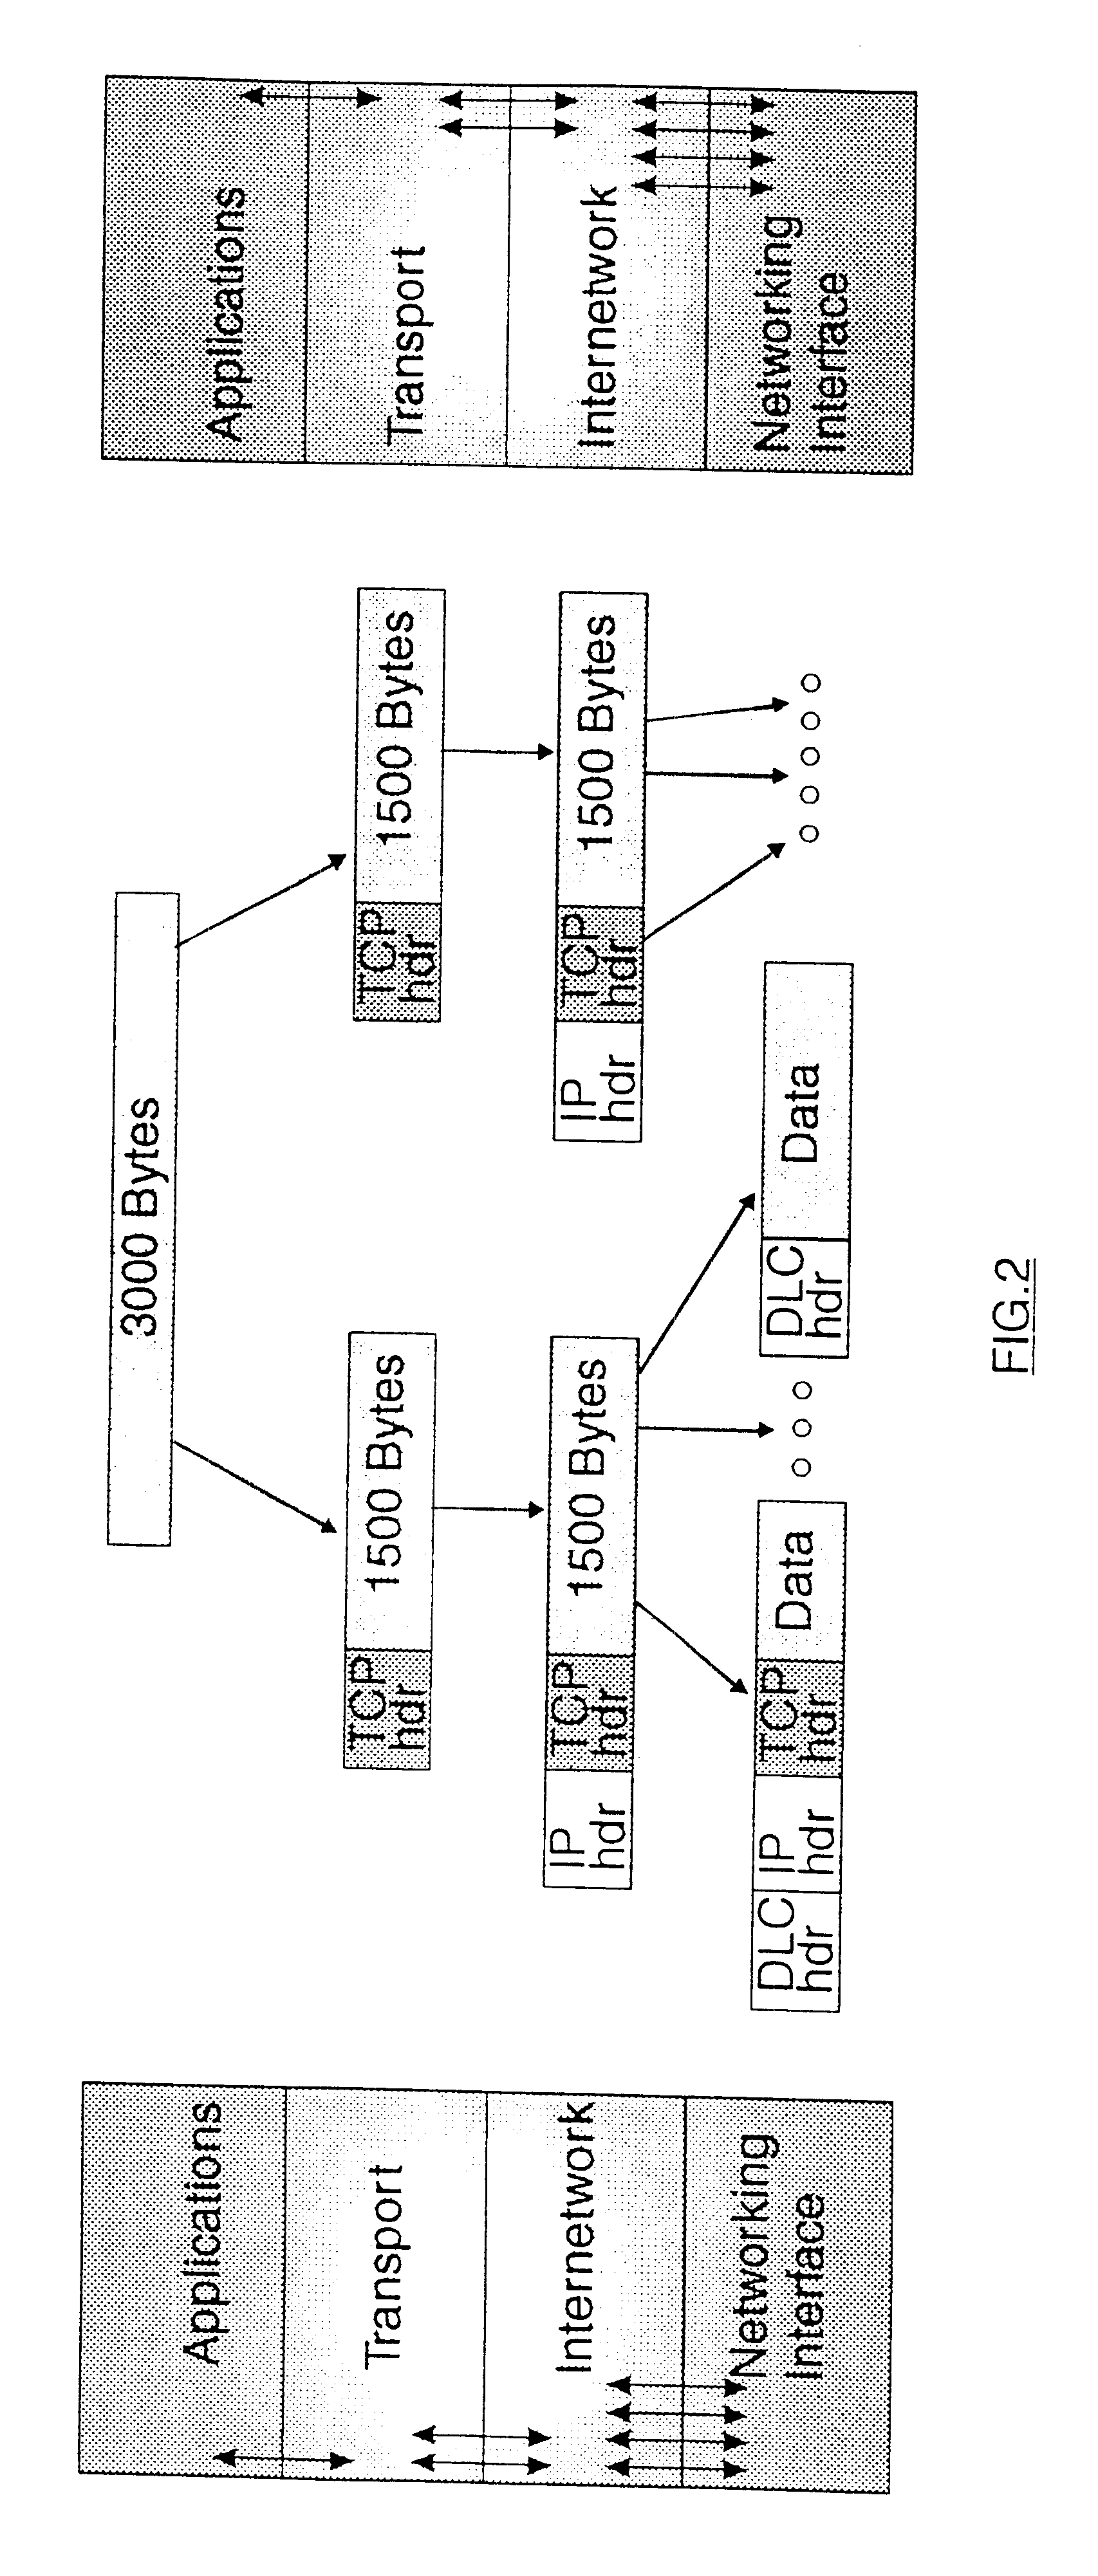 Method for improving routing distribution within an internet and system for implementing said method